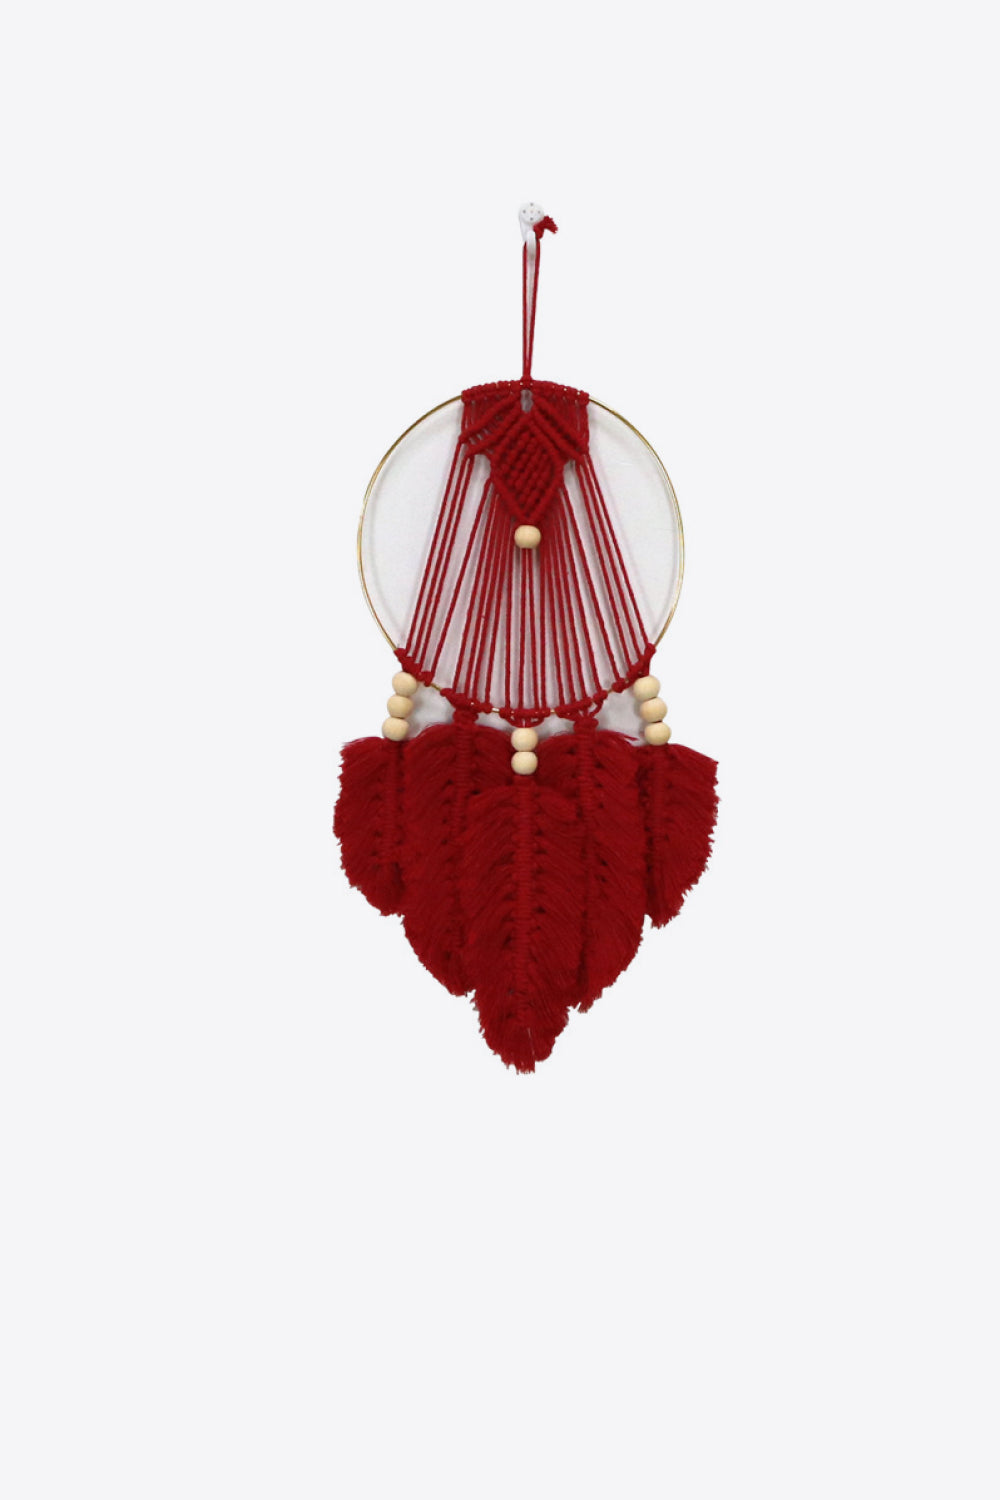 Feather Macrame Wall Hanging Decor - AllIn Computer